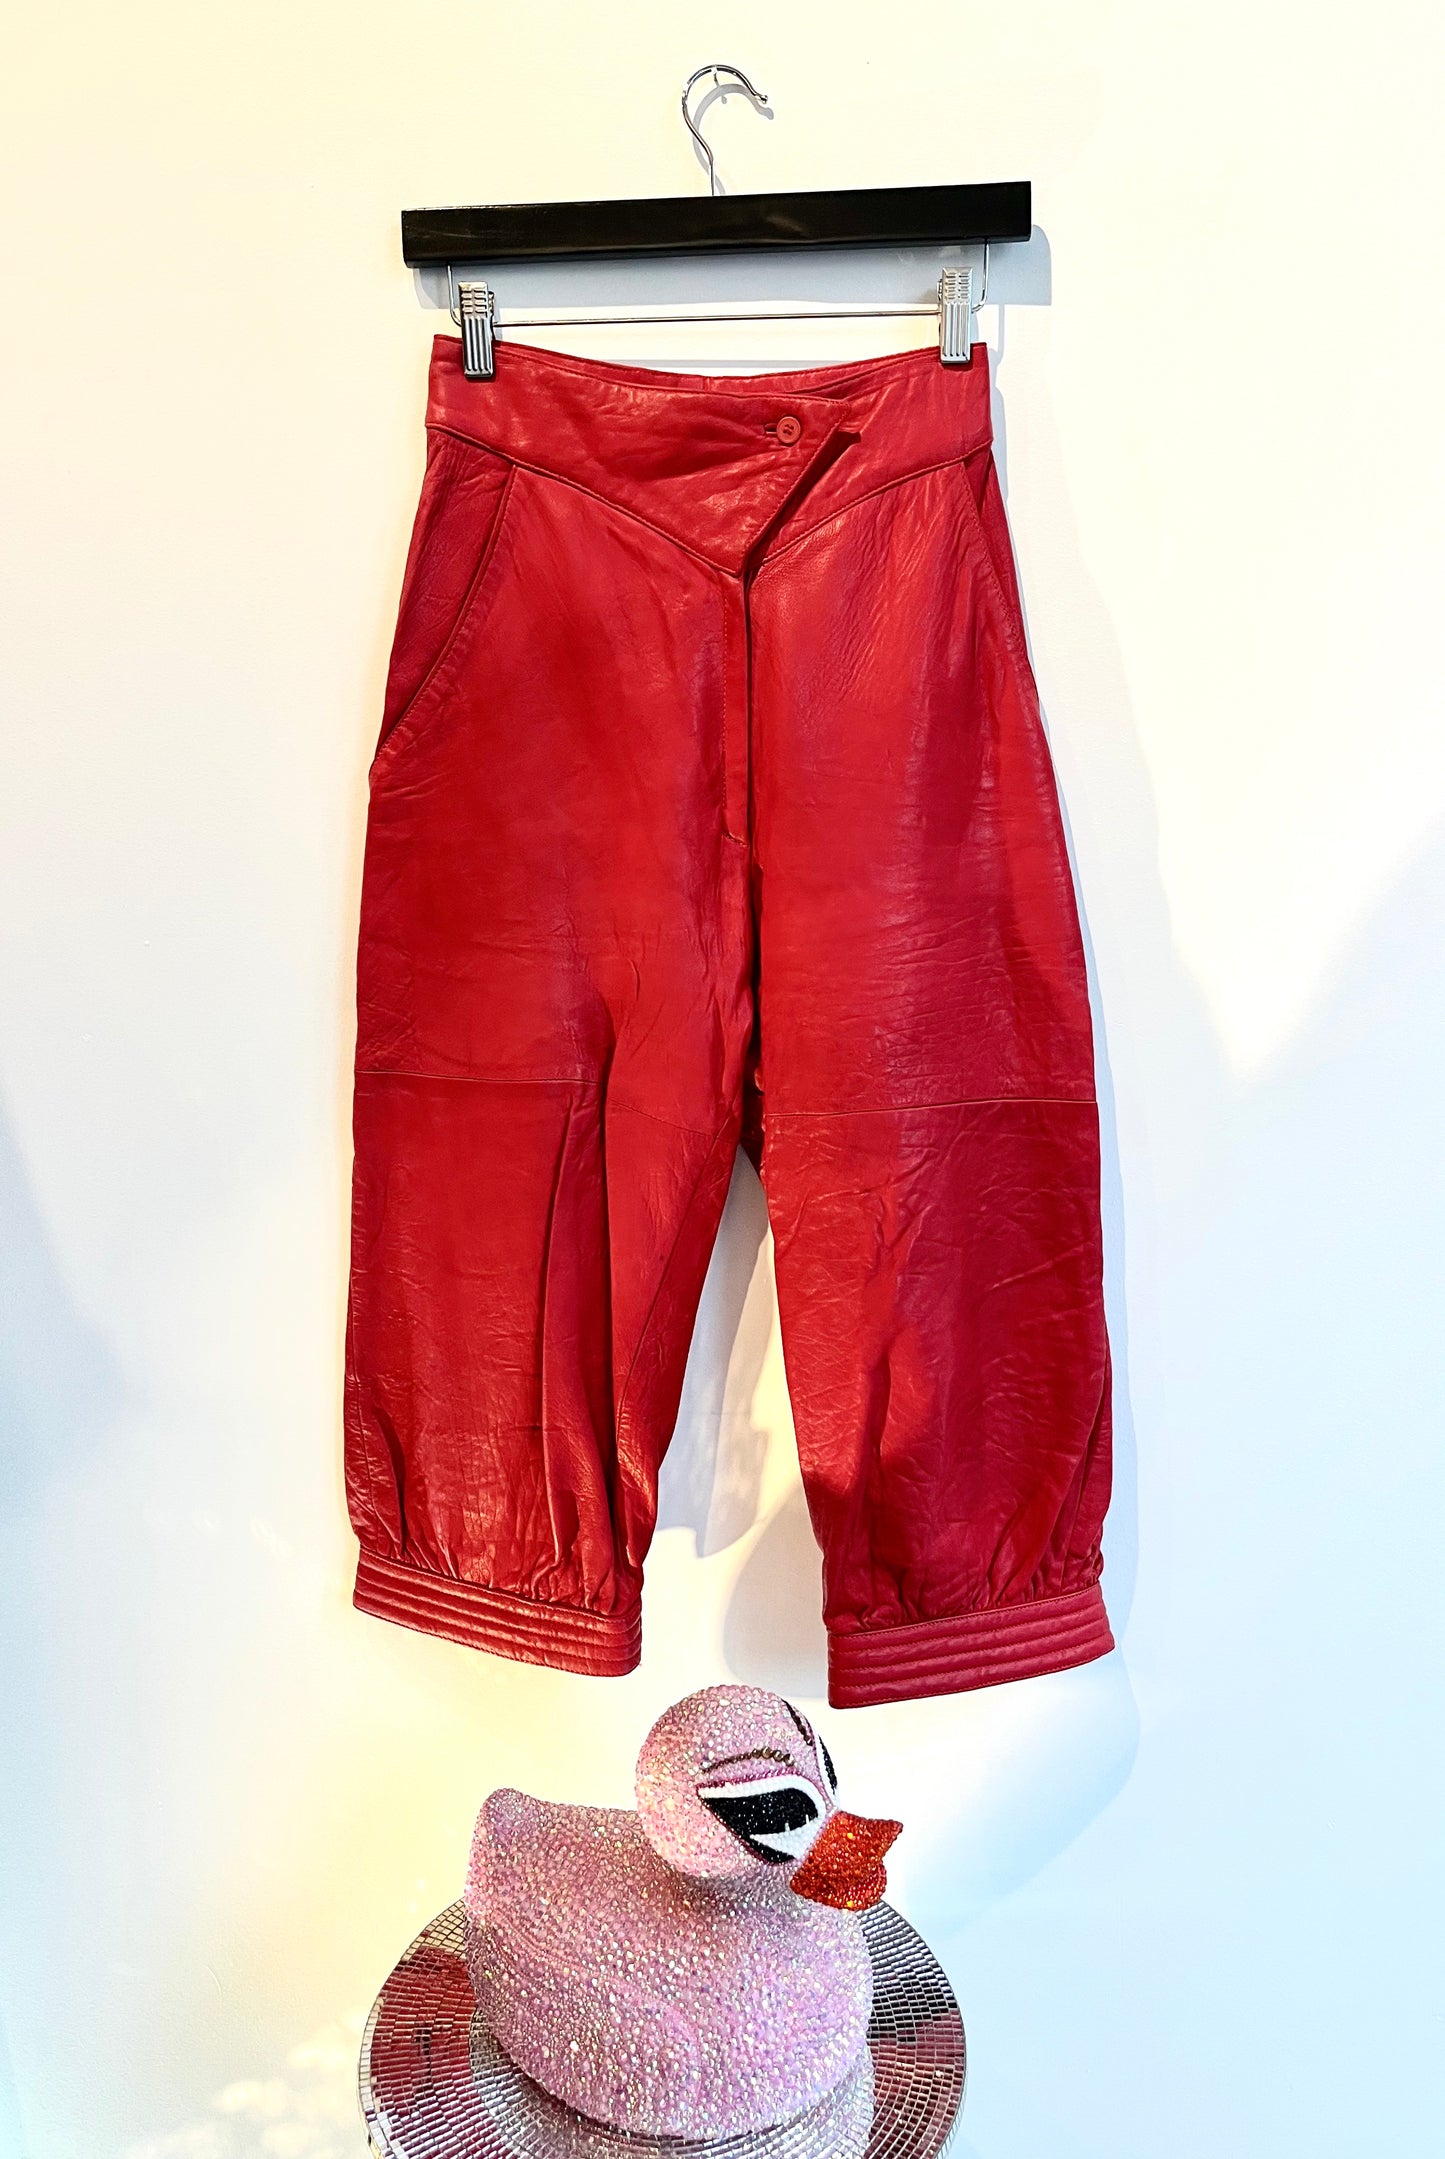 Vintage Red Leather Knickers, 70s, Miami